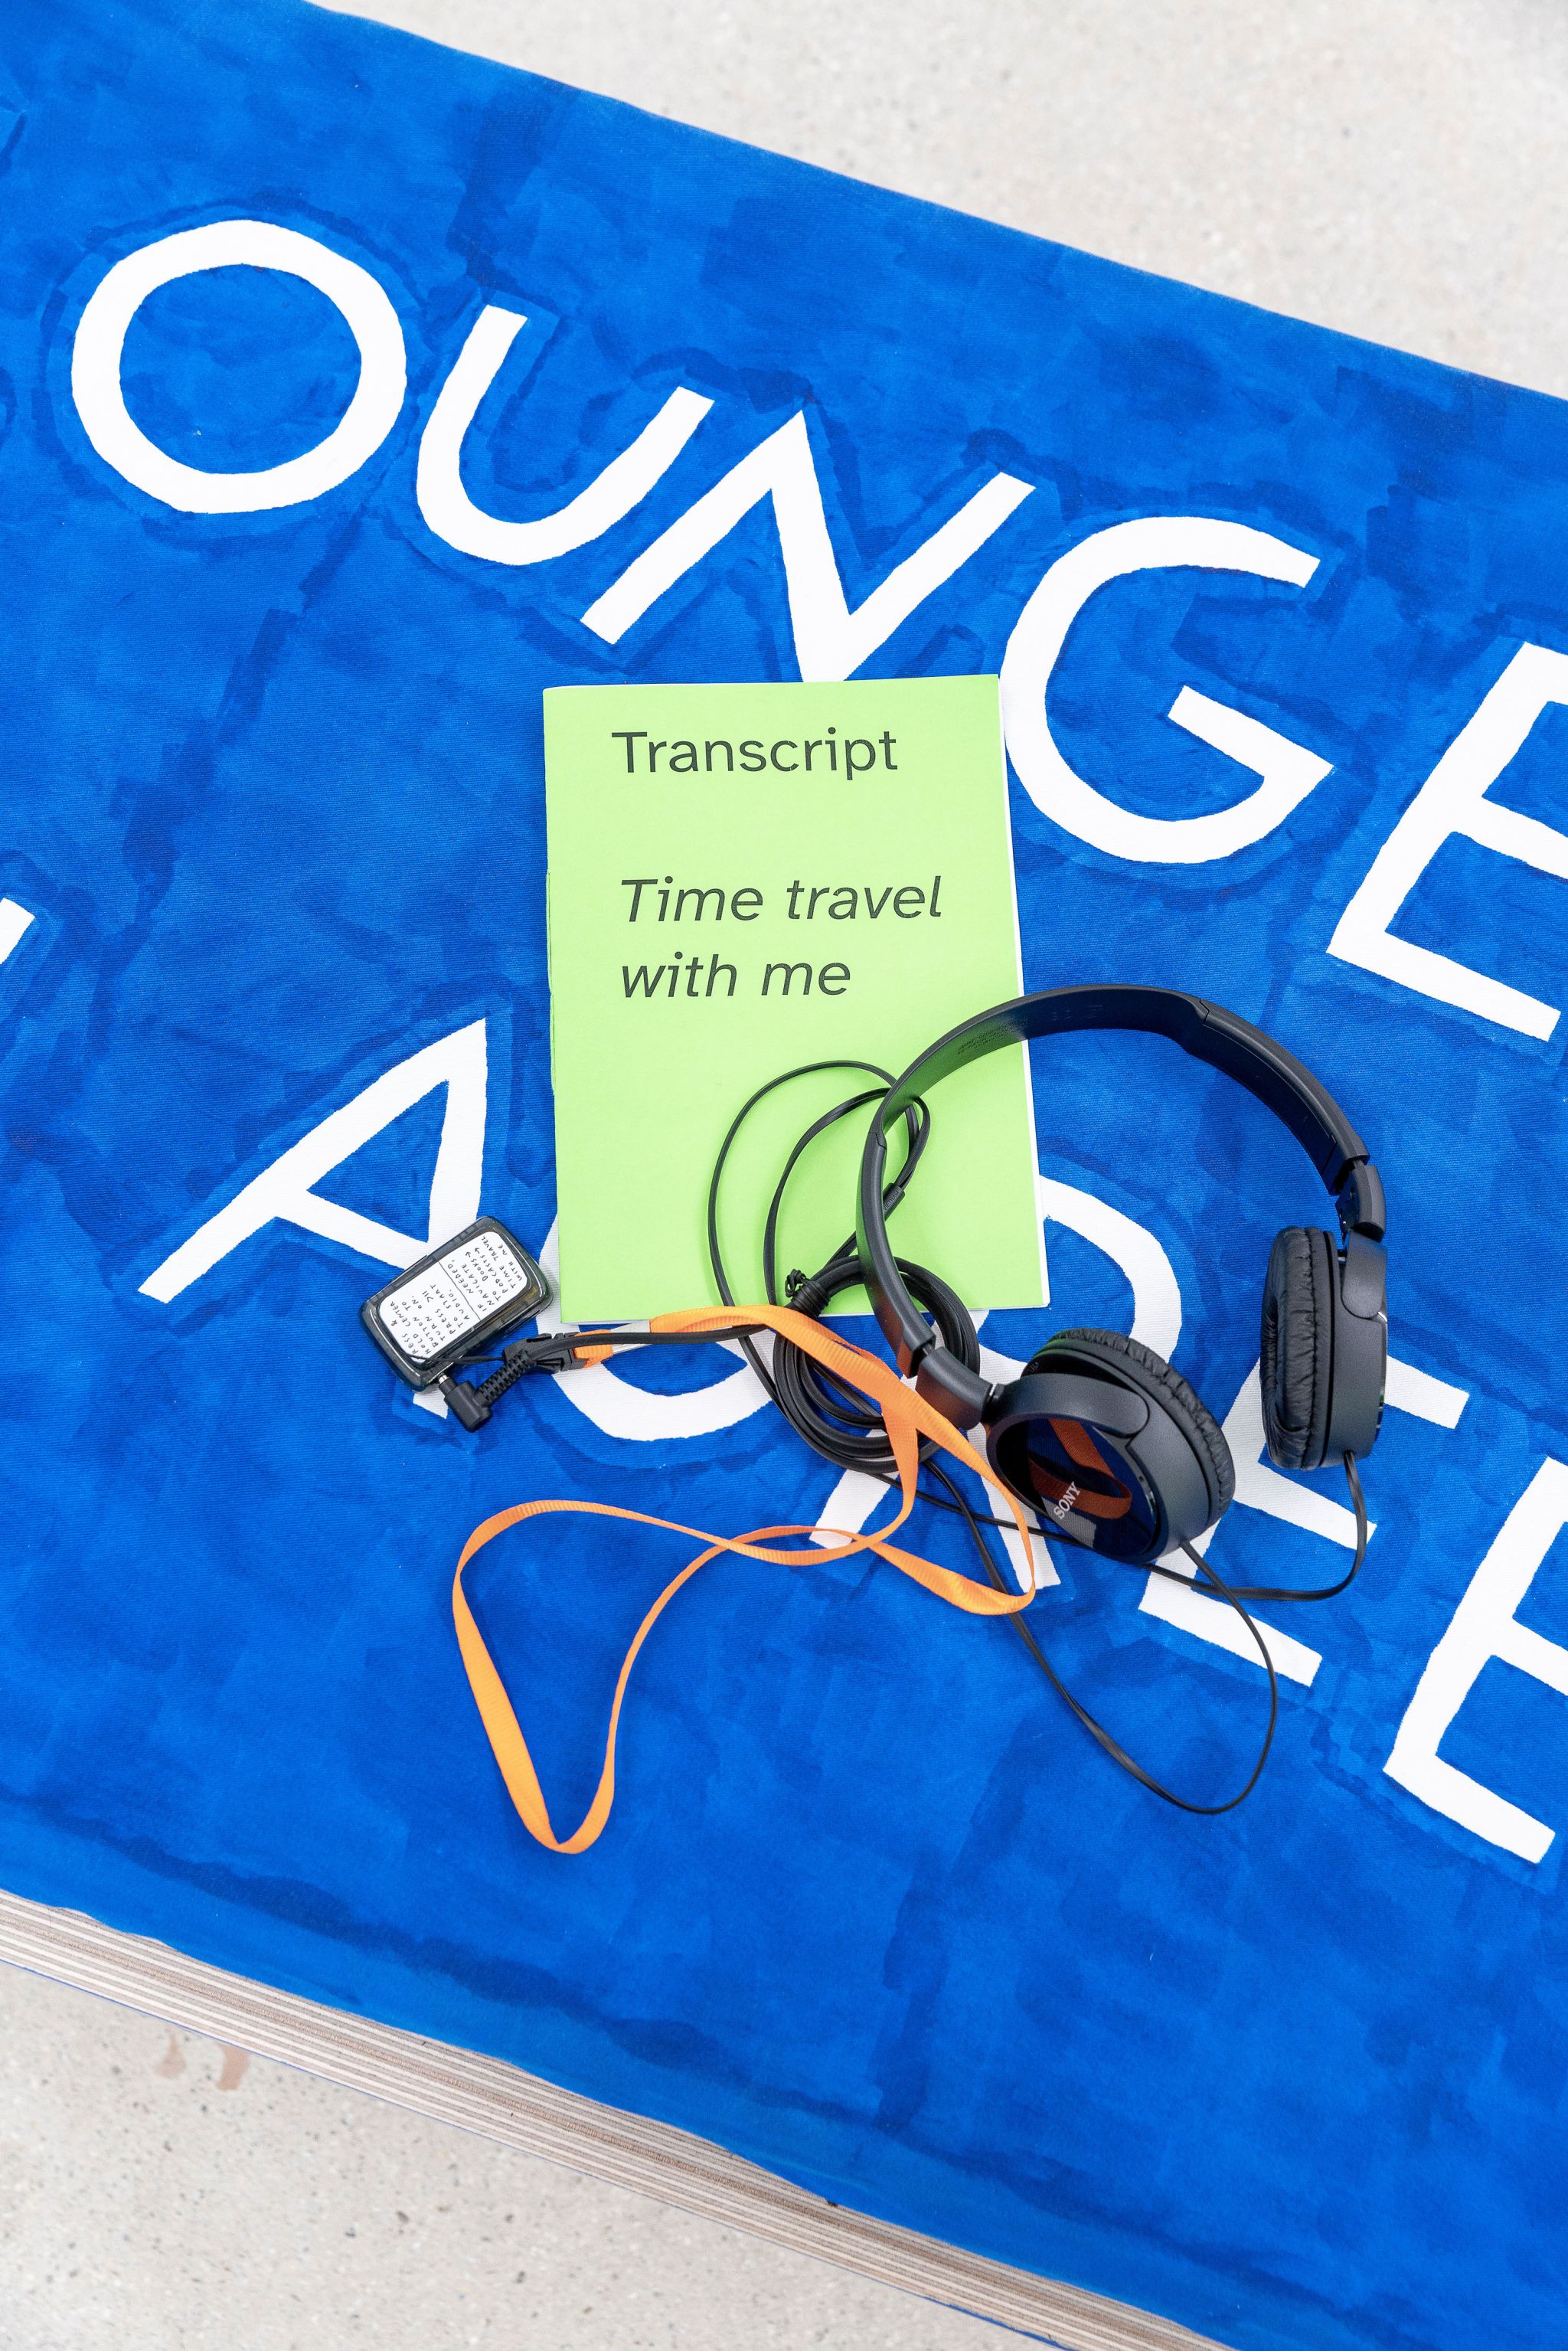 Finnegan Shannon, Time travel with me, 2022, Audio, mp3-Player, lanyard, headphones, transcript, zine, Image description: Headphones plugged into an mp3-Player and a zine laying on a blue piece of furniture. On the zine, it says “Transcript” and “Time travel with me.” The player is flipped, the back shows a sticker with handwritten instructions for how to play the audio.